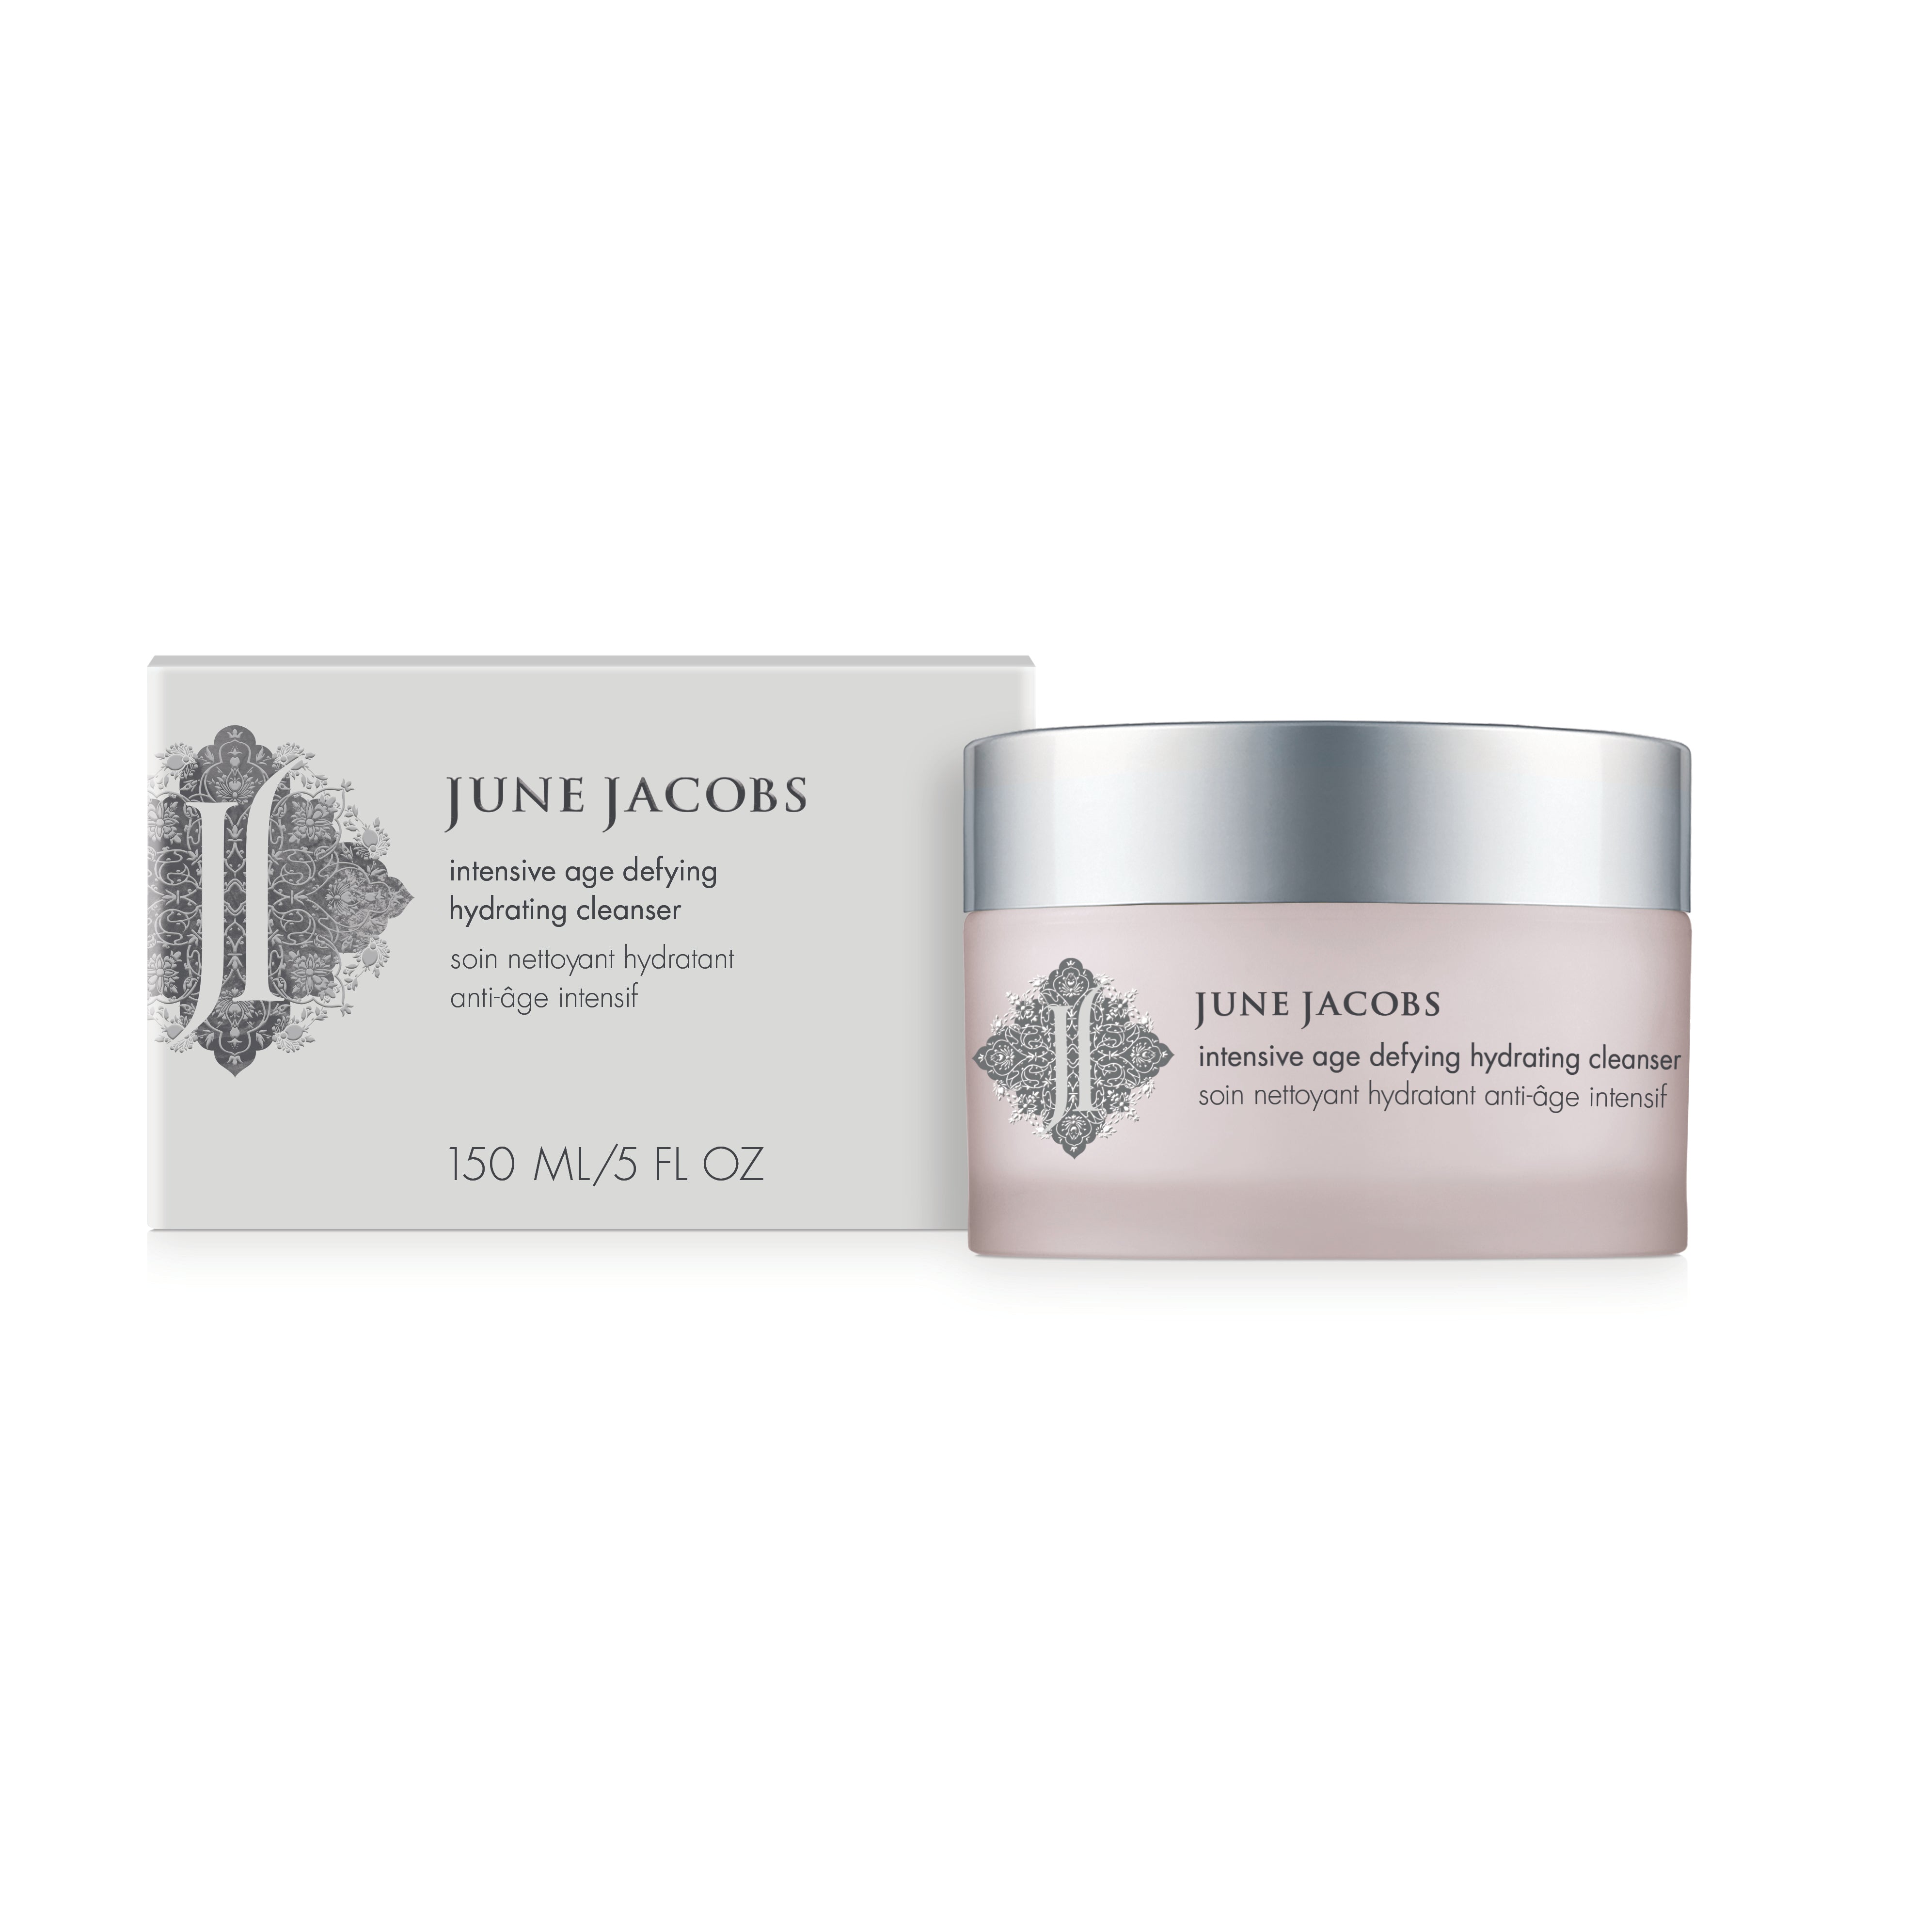 June Jacobs Intensive Age Defying Hydrating Cleanser 5.0oz